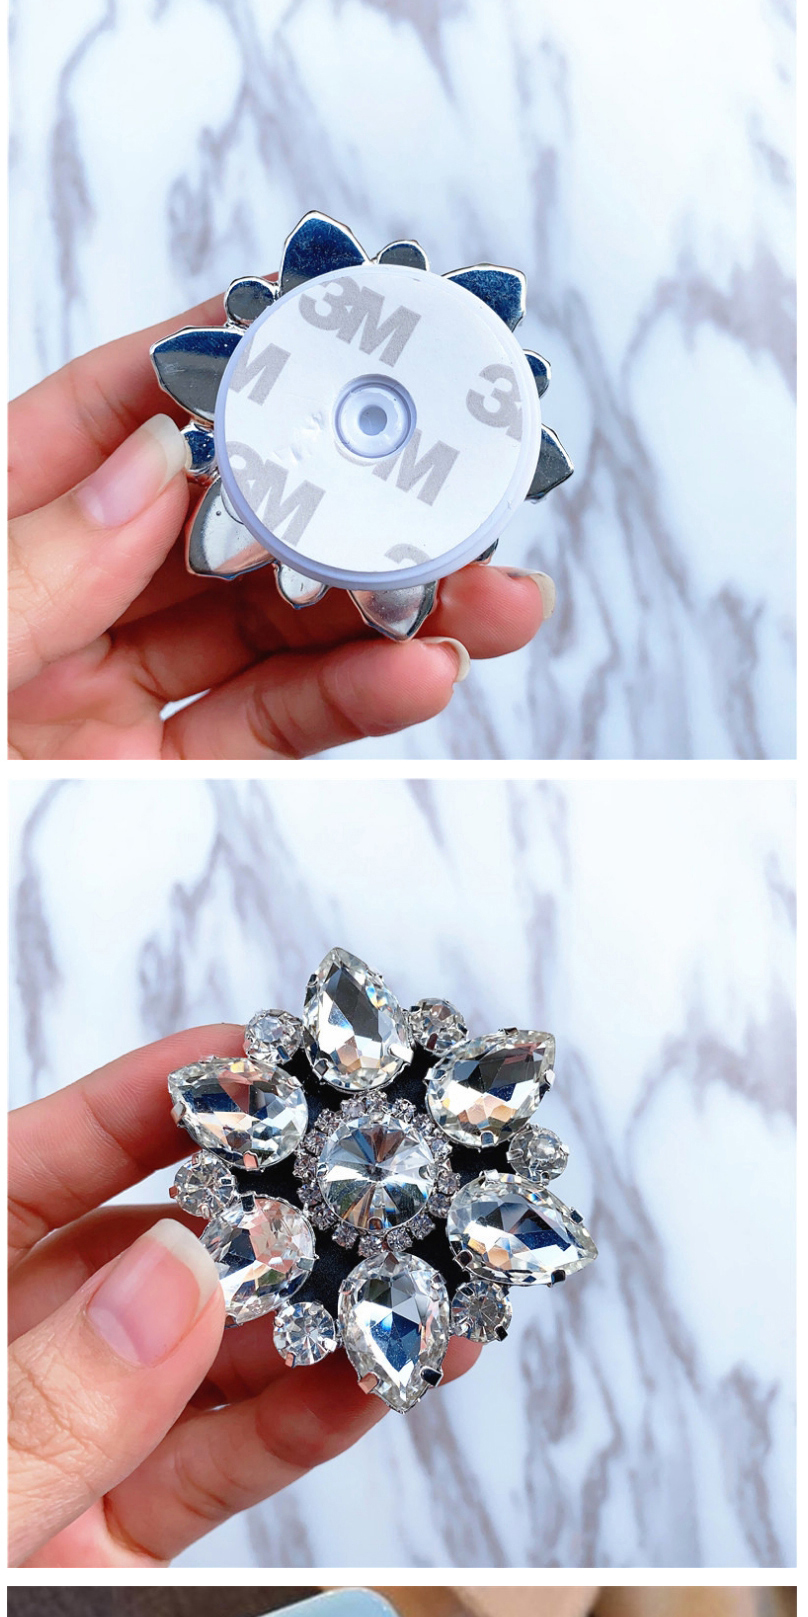 Fashion No. 11 Square Button Diamond-blue Jeweled Cubic Crystal Stand Ring Clasp,Phone Hlder